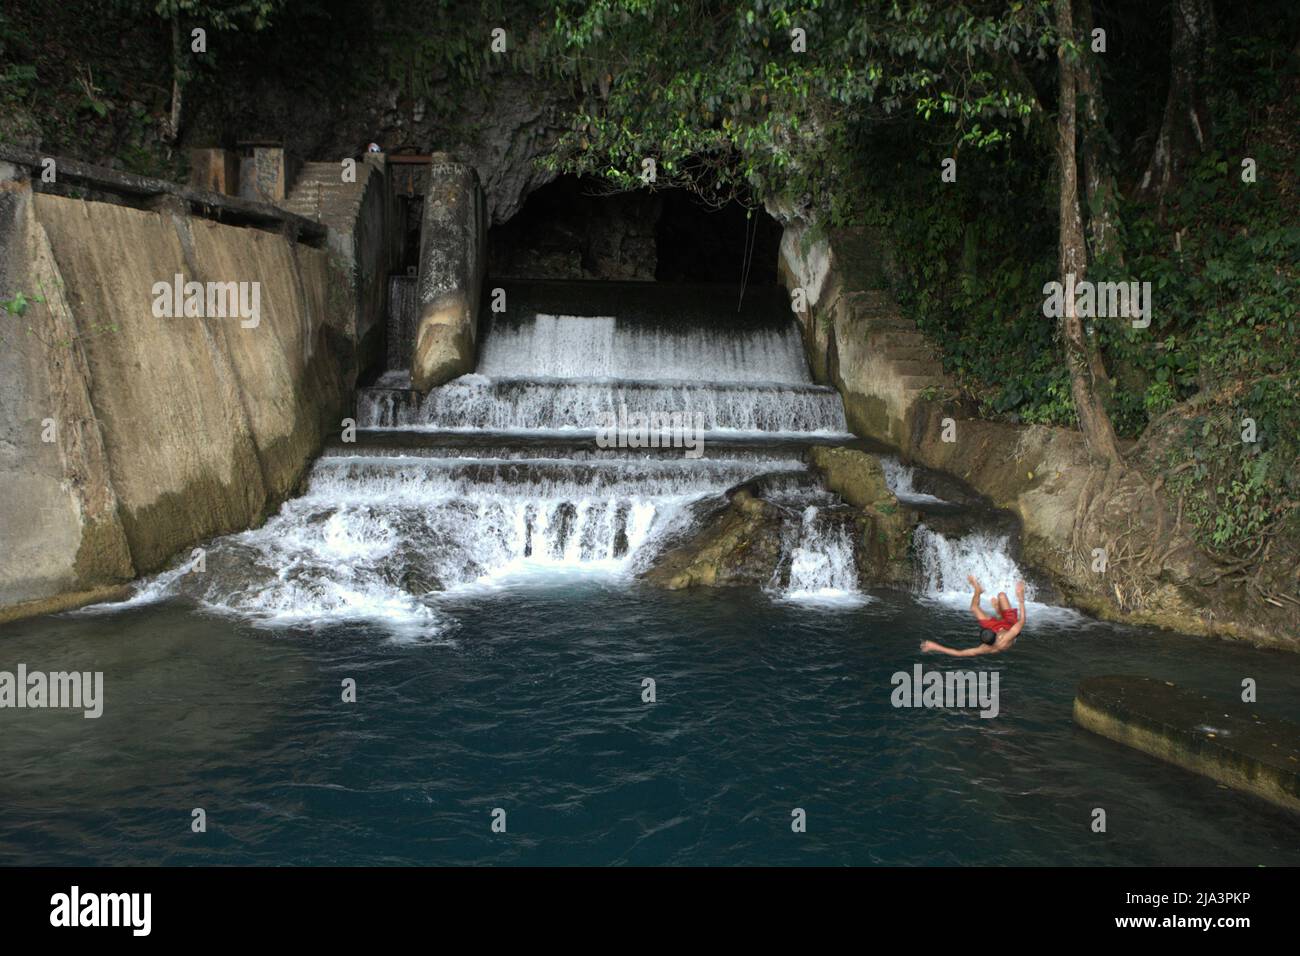 A waterfall and dam at limestone caves of Waikelo Sawah, a rare water source in Sumba—an island regularly hit by drought, which is located in Tema Tana village, East Wewewa, Southwest Sumba, East Nusa Tenggara, Indonesia. Stock Photo